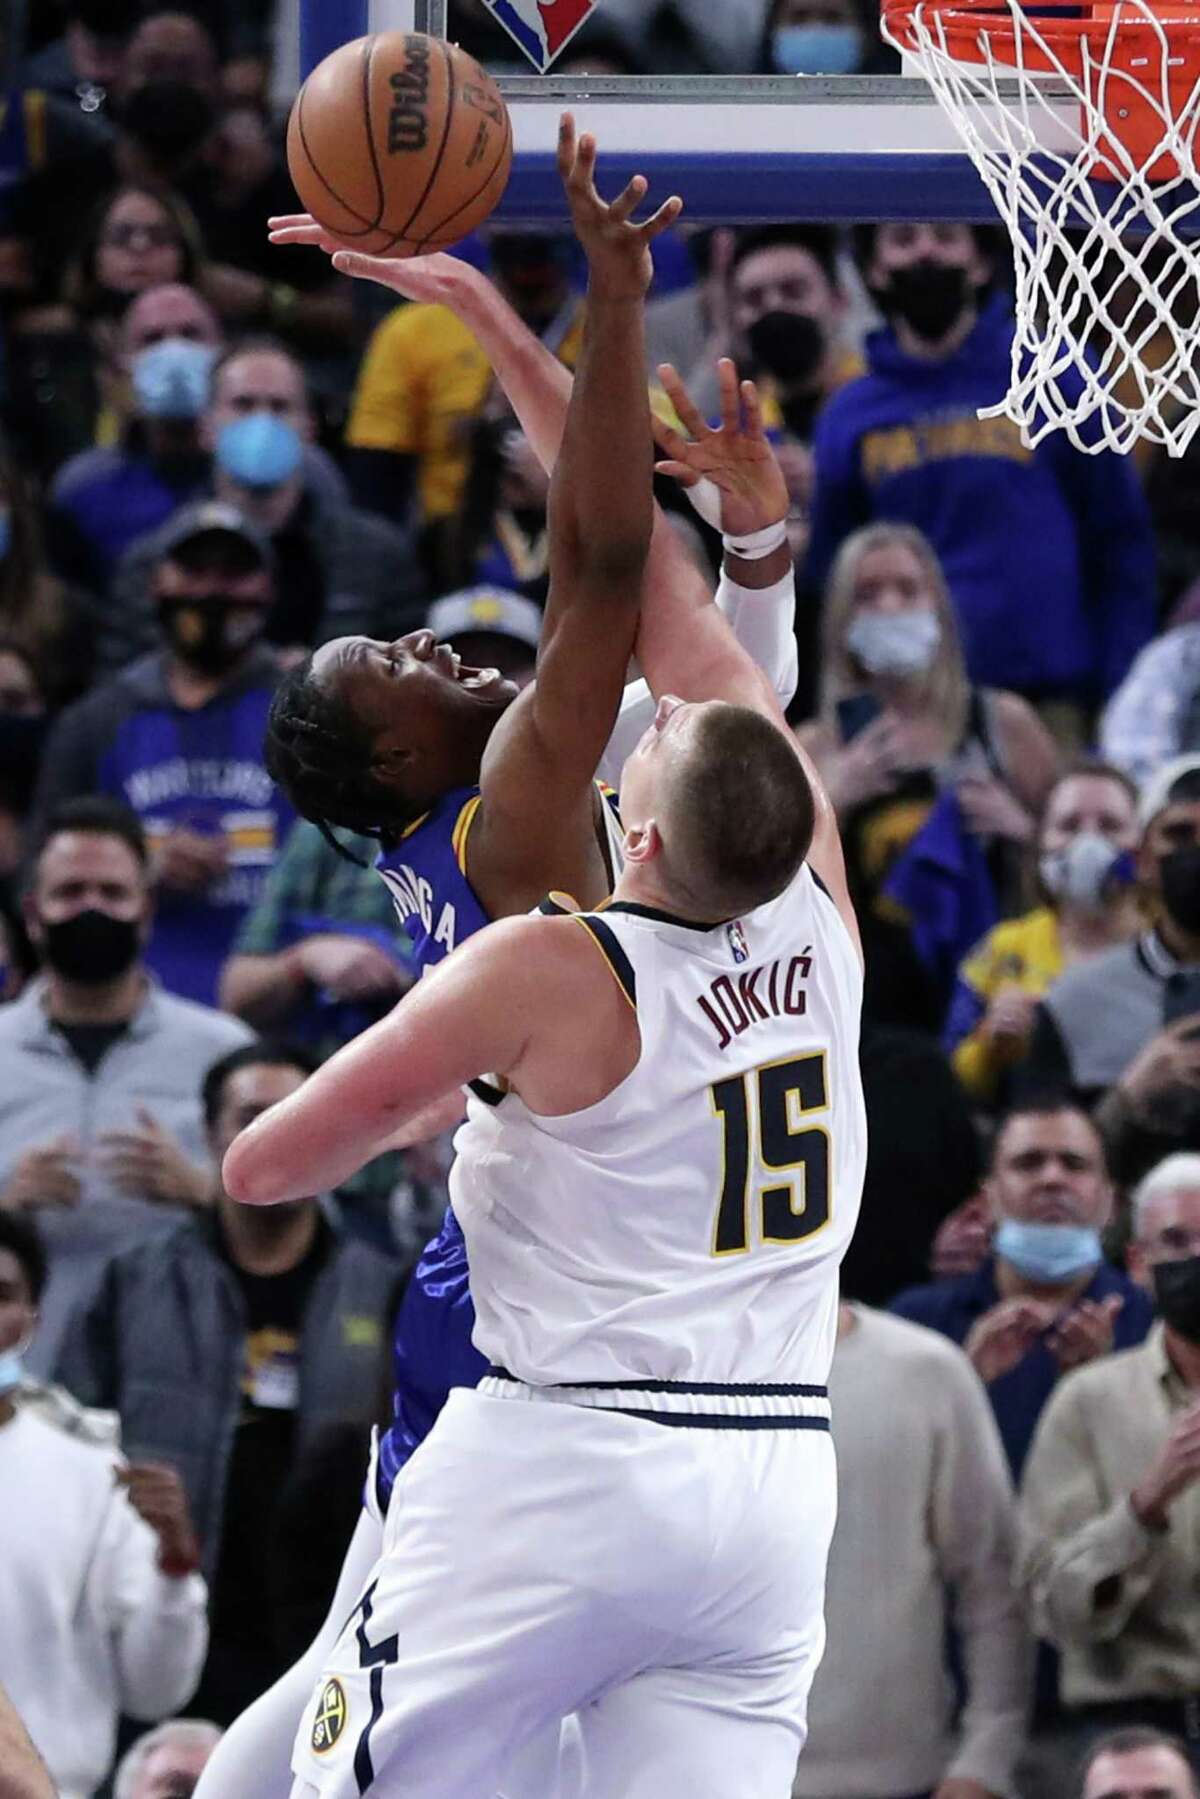 Golden State Warriors' Jonathan Kuminga can't score tying basket in final seconds of 4th quarter against Denver Nuggets' Nikola Jokic during Nuggets' 89-86 win in NBA game at Chase Center in San Francisco, Calif., on Tuesday, December 28, 2021.